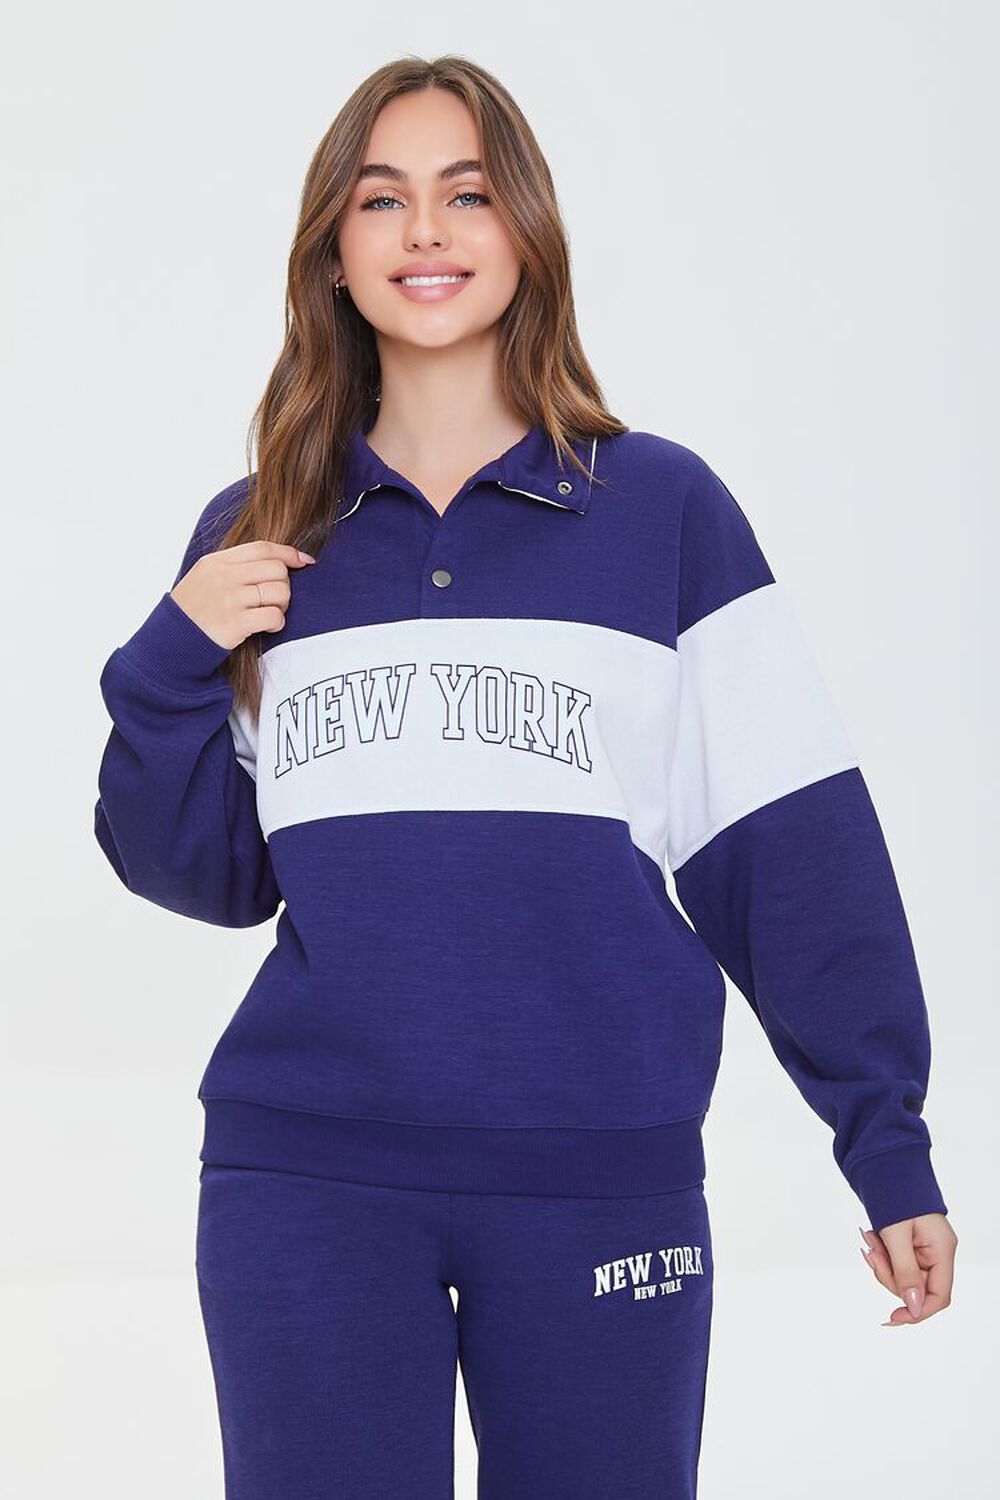 NAVY/WHITE Colorblock New York Graphic Pullover, image 1